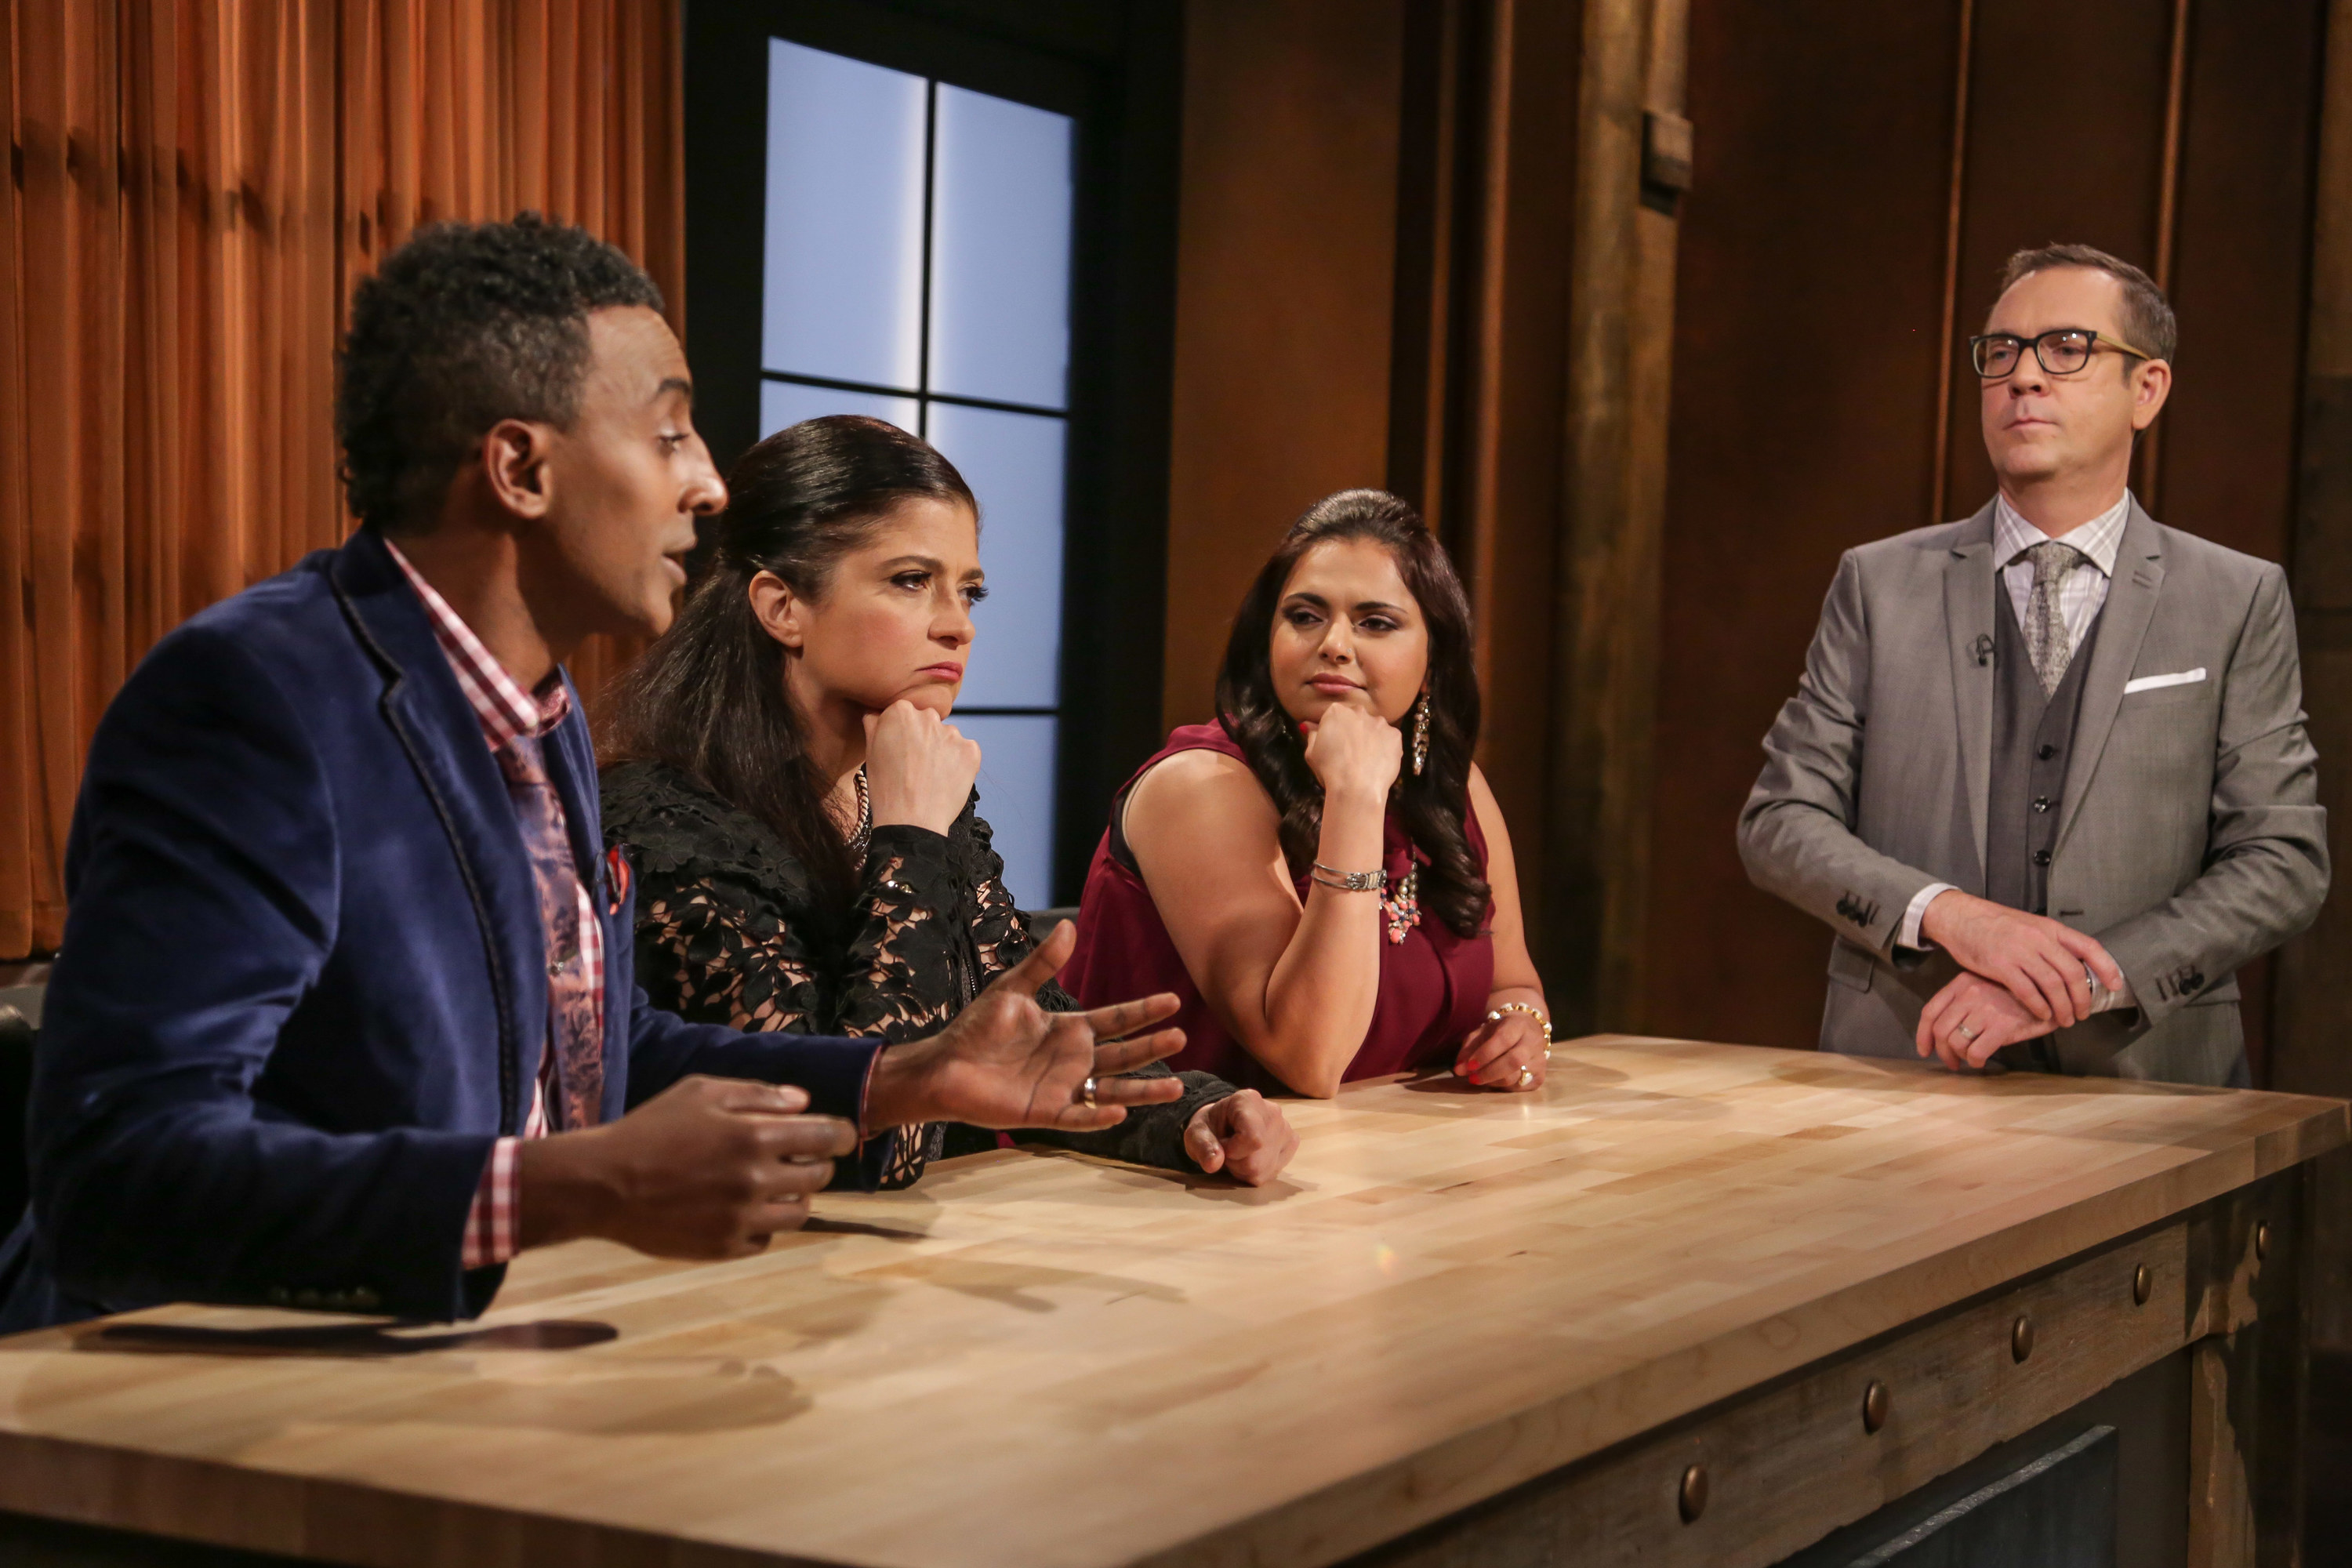 the judges of Chopped discuss a dish